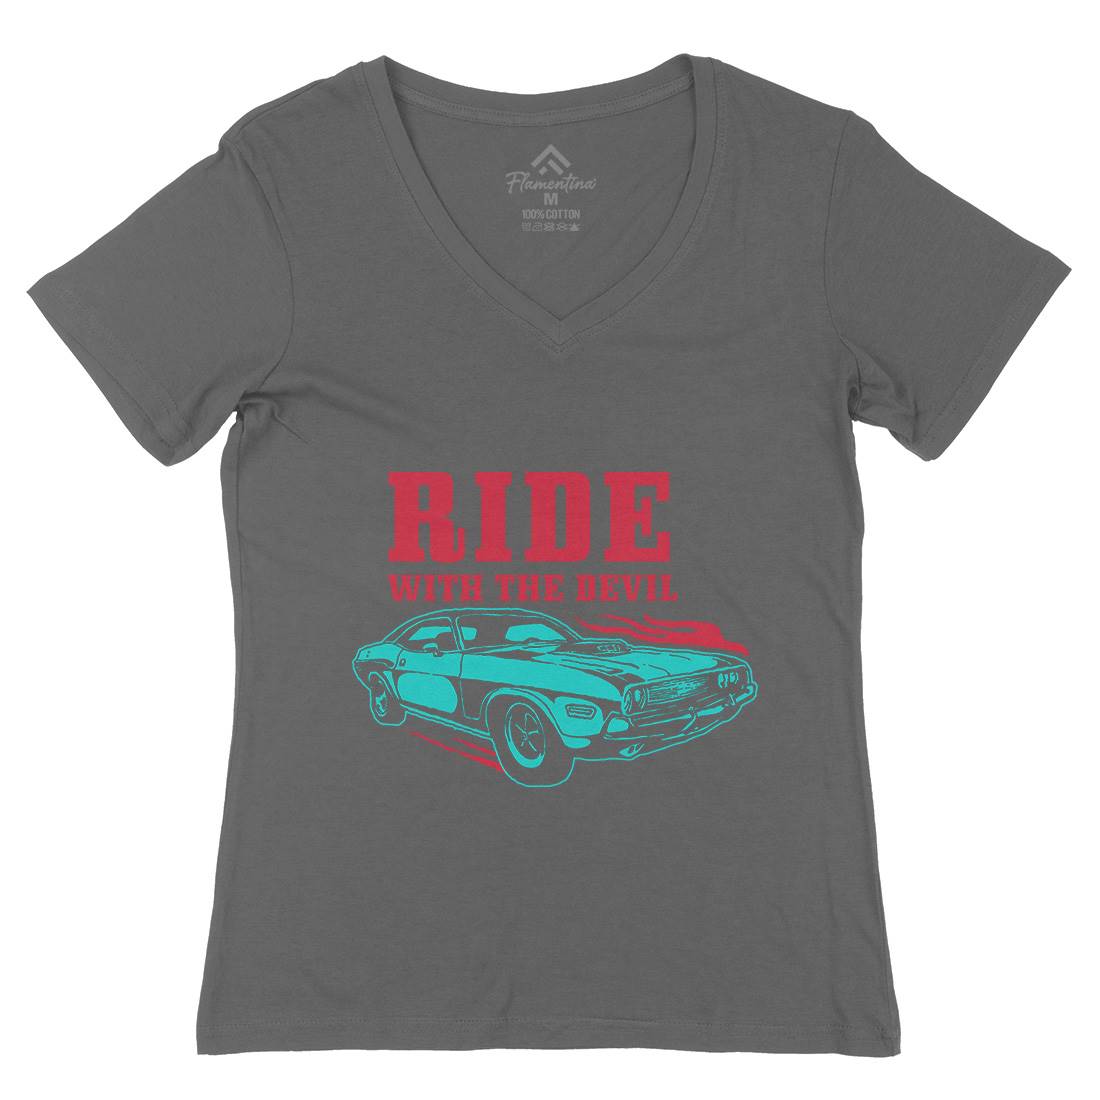 Ride With Devil Womens Organic V-Neck T-Shirt Cars A461